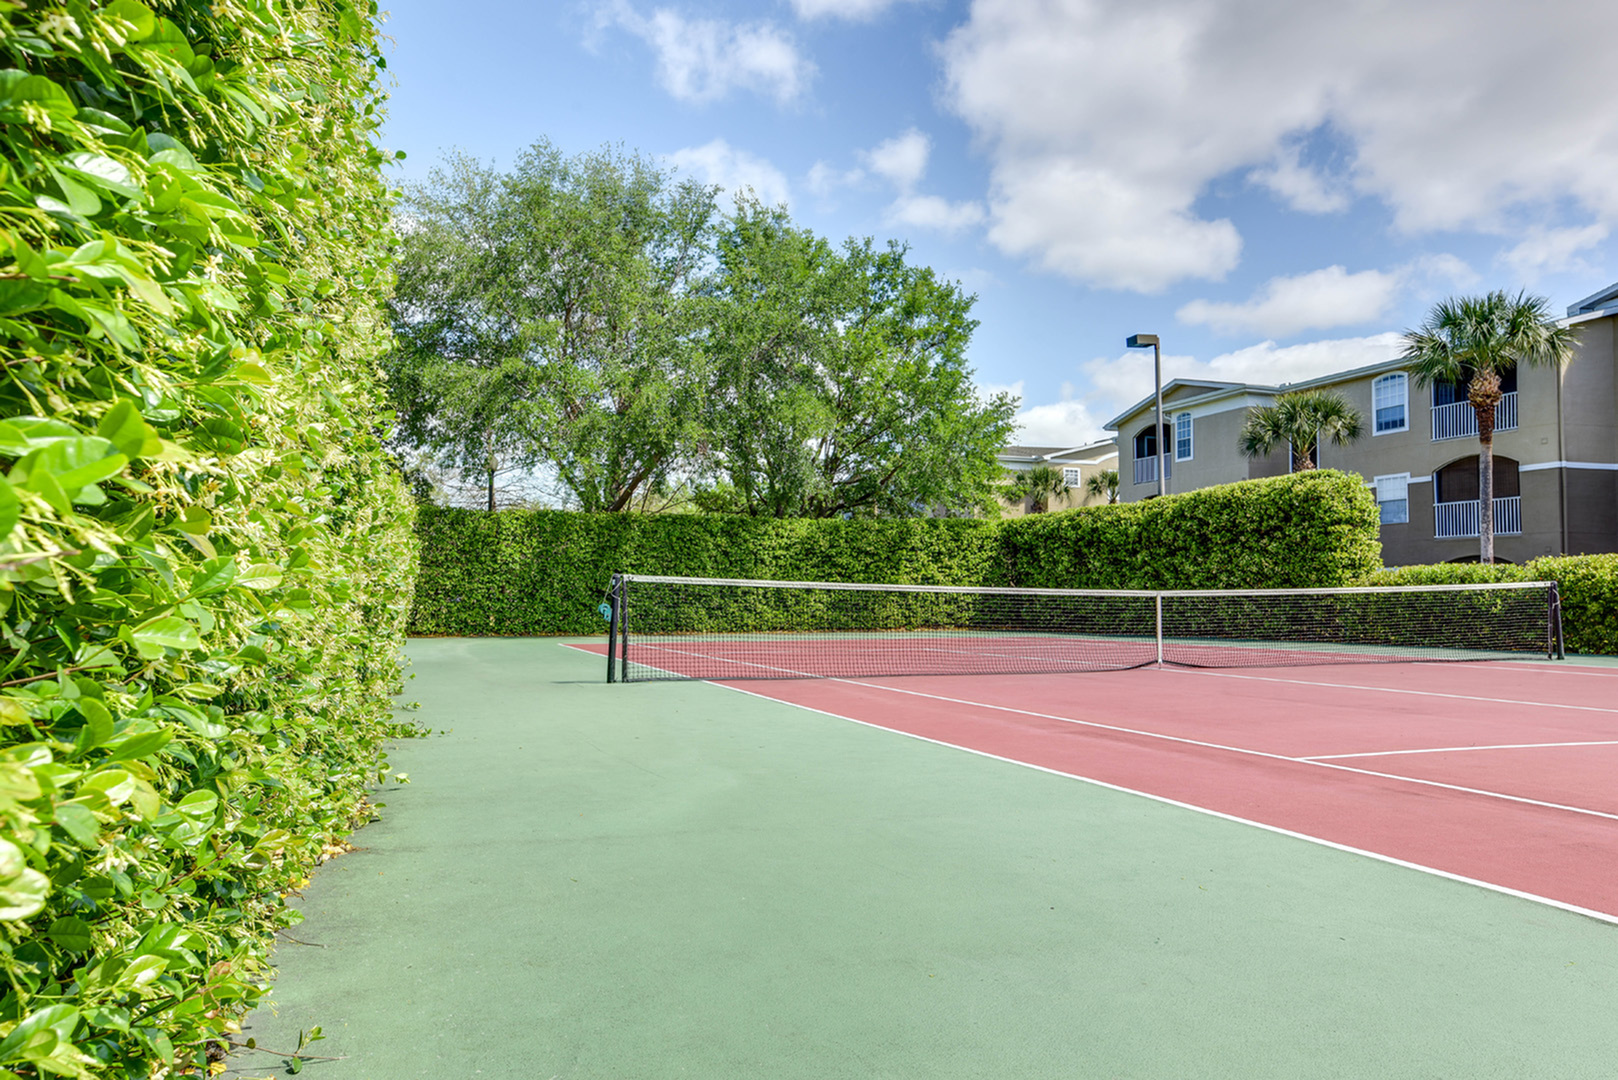 Tennis court surrounded by tall bushes.  Trees and building in background.